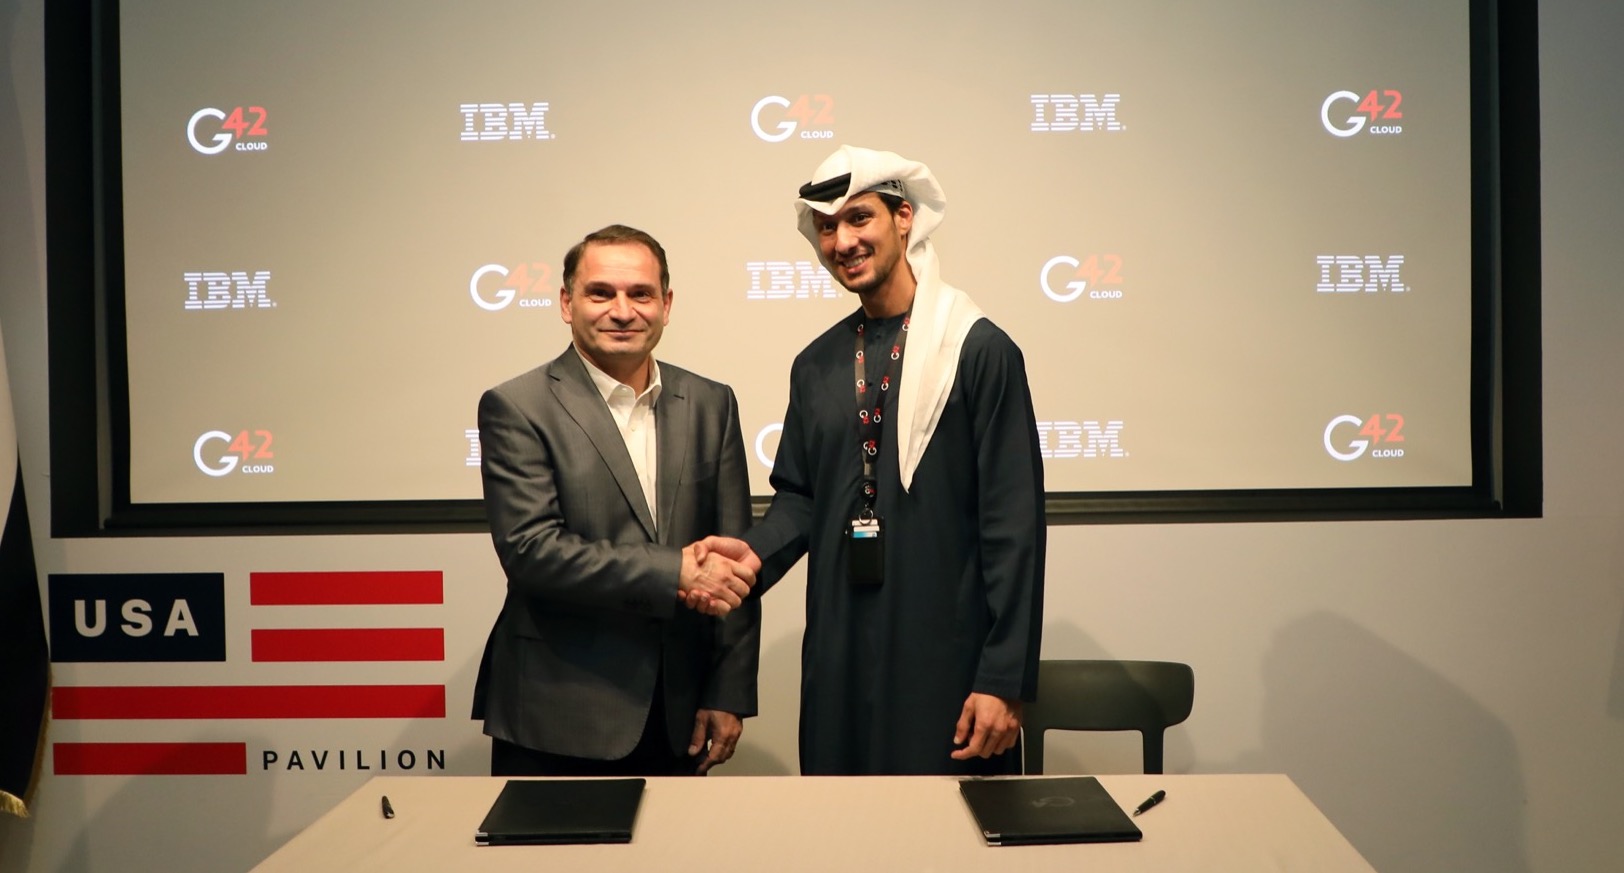 G42 CLOUD AND IBM WILL JOIN FORCES TO SPEED UP DIGITAL TRANSFORMATION FOR CLIENTS.